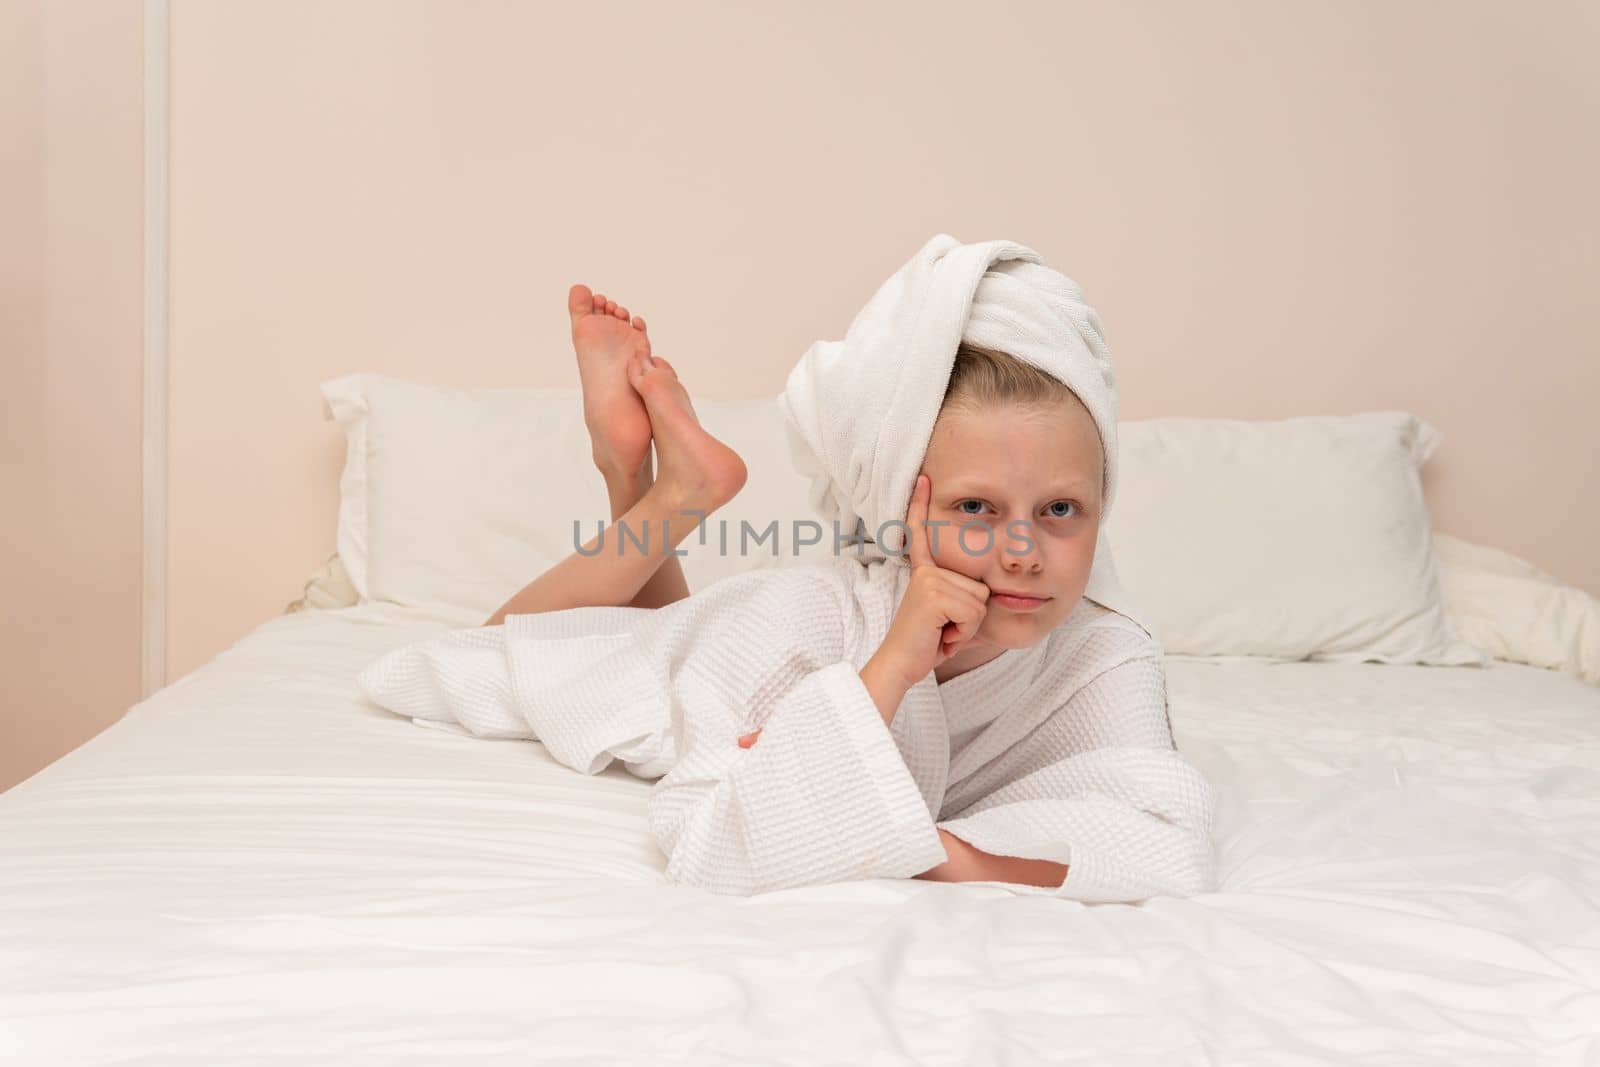 Smiling elbows smile coffee Creek thinks copyspace bathrobe white cute, for people dressing in young and beauty spa, pirate child. Bathing kid female,